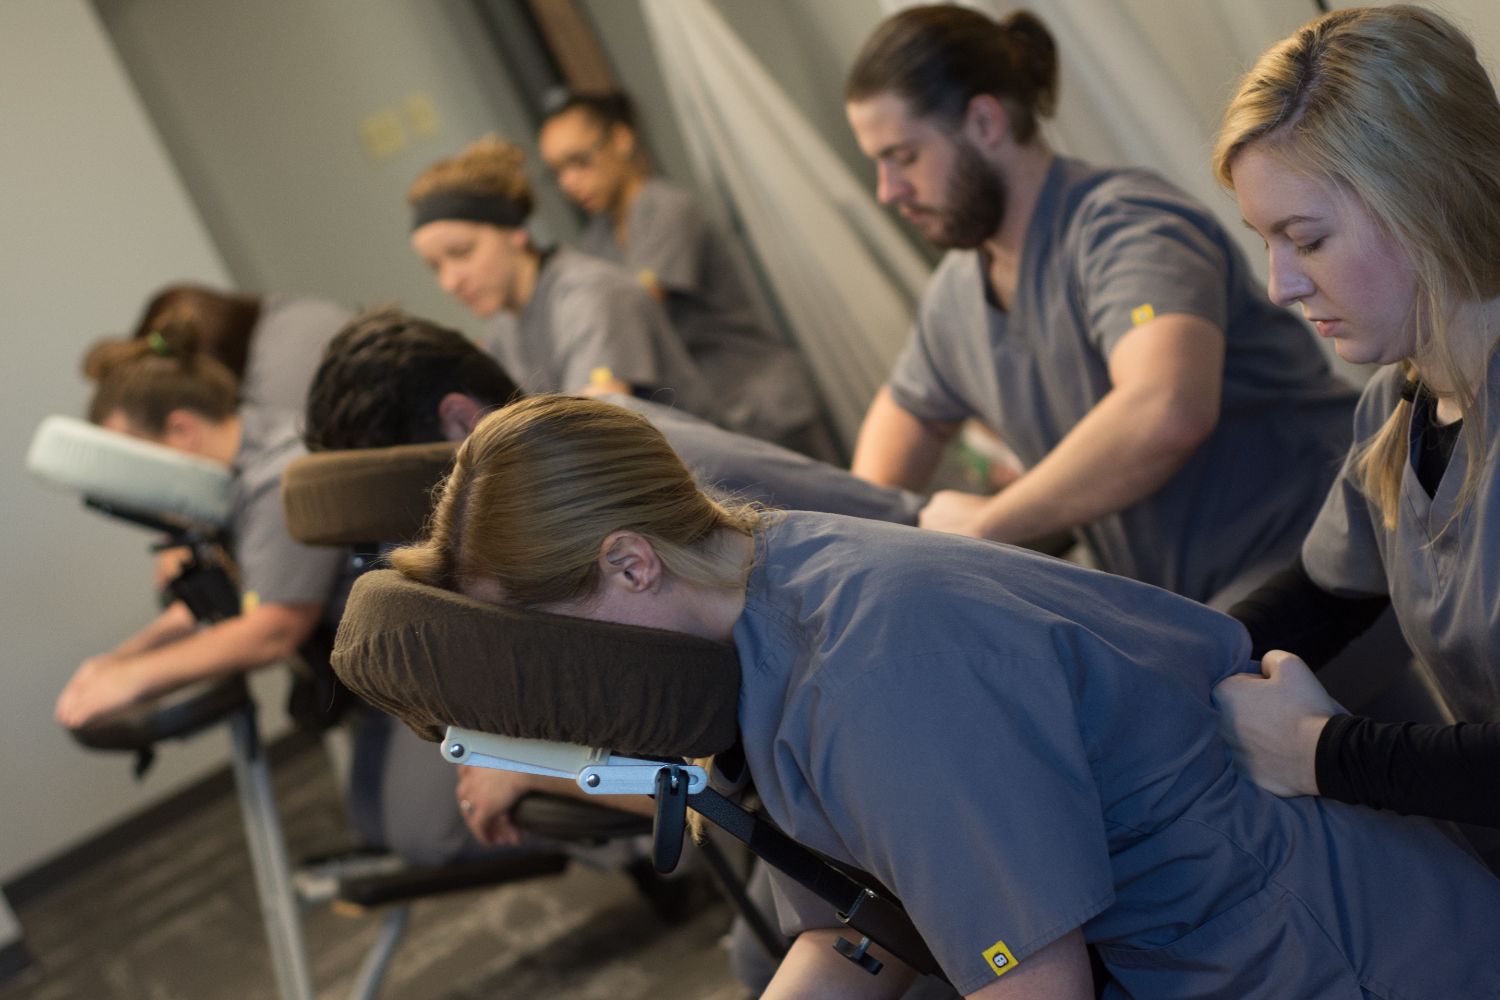 This is an image of massage students in massage chairs receiving massages from other students to practice their skills.